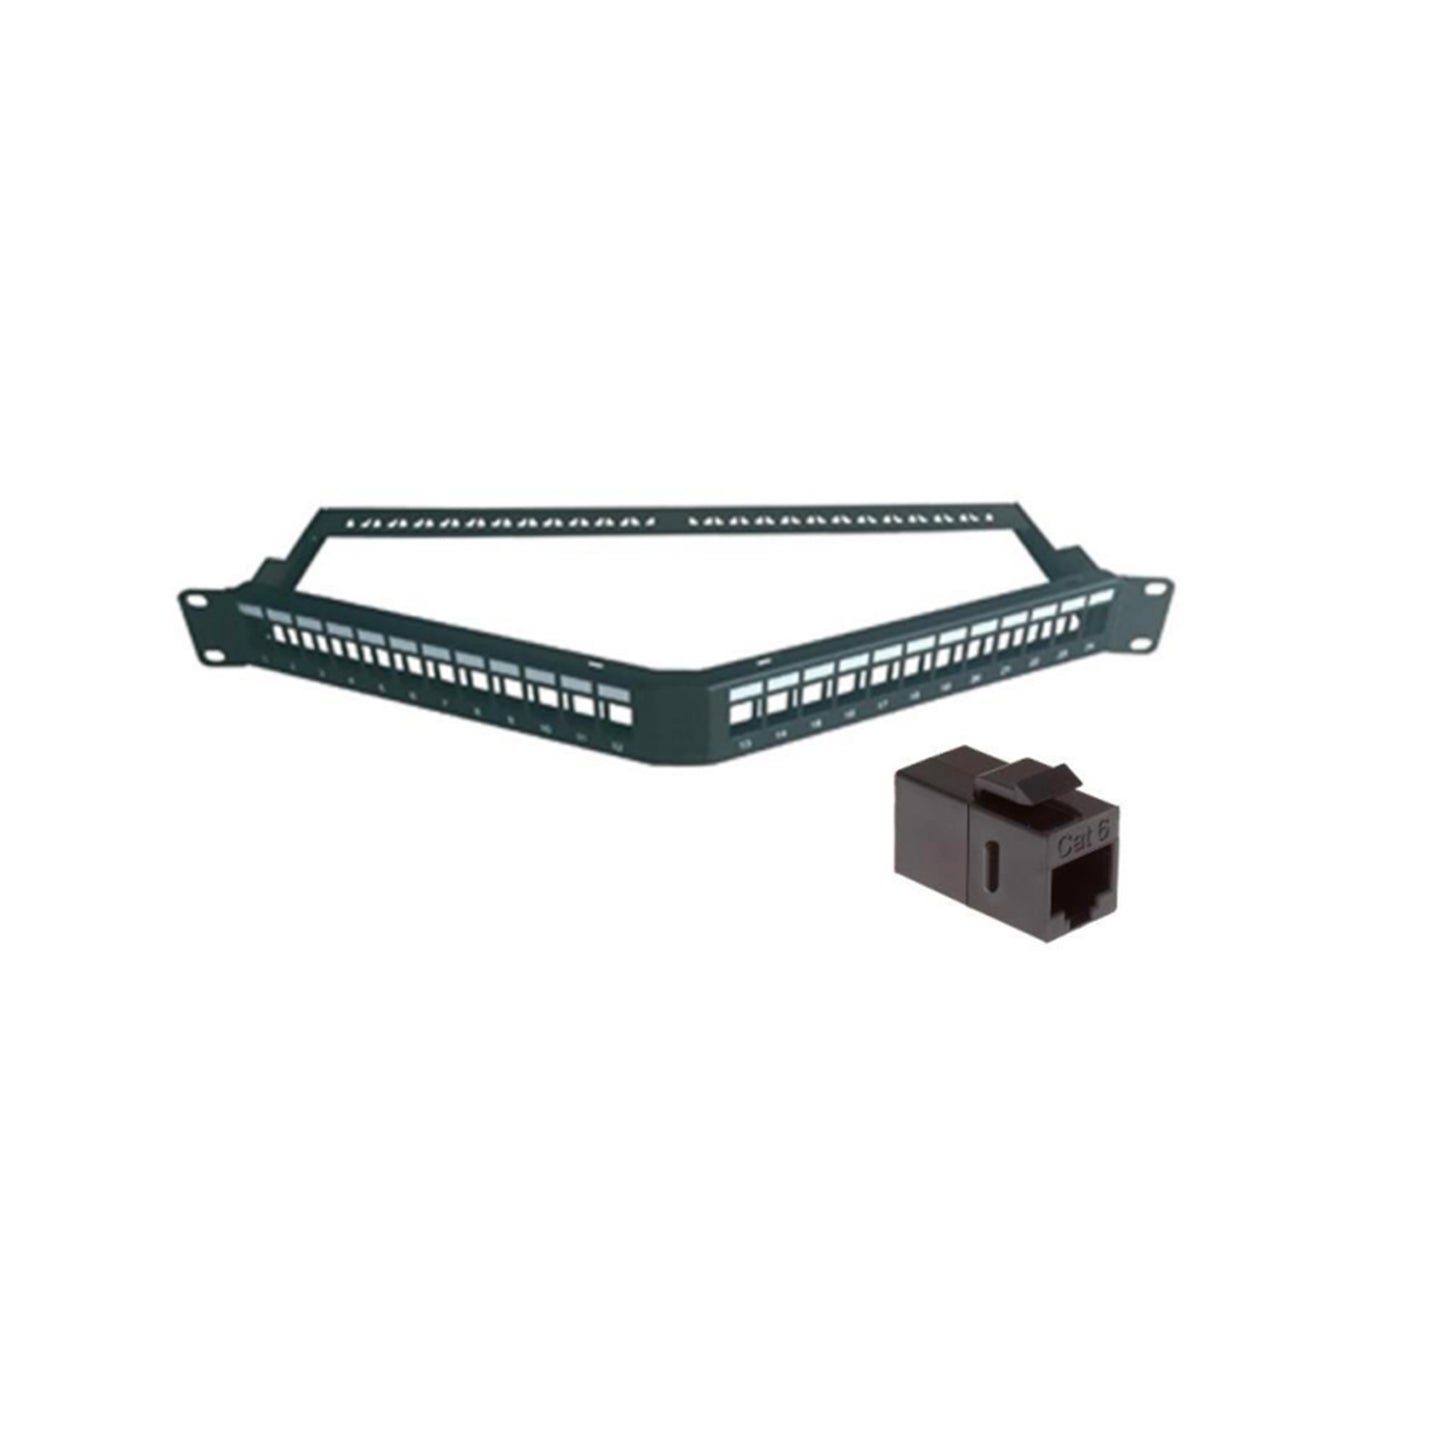 Msys Connect 19" Rack Mount 24 Cat6 Unshielded Coupler Loaded, Angled Patch Panel (516321-21)